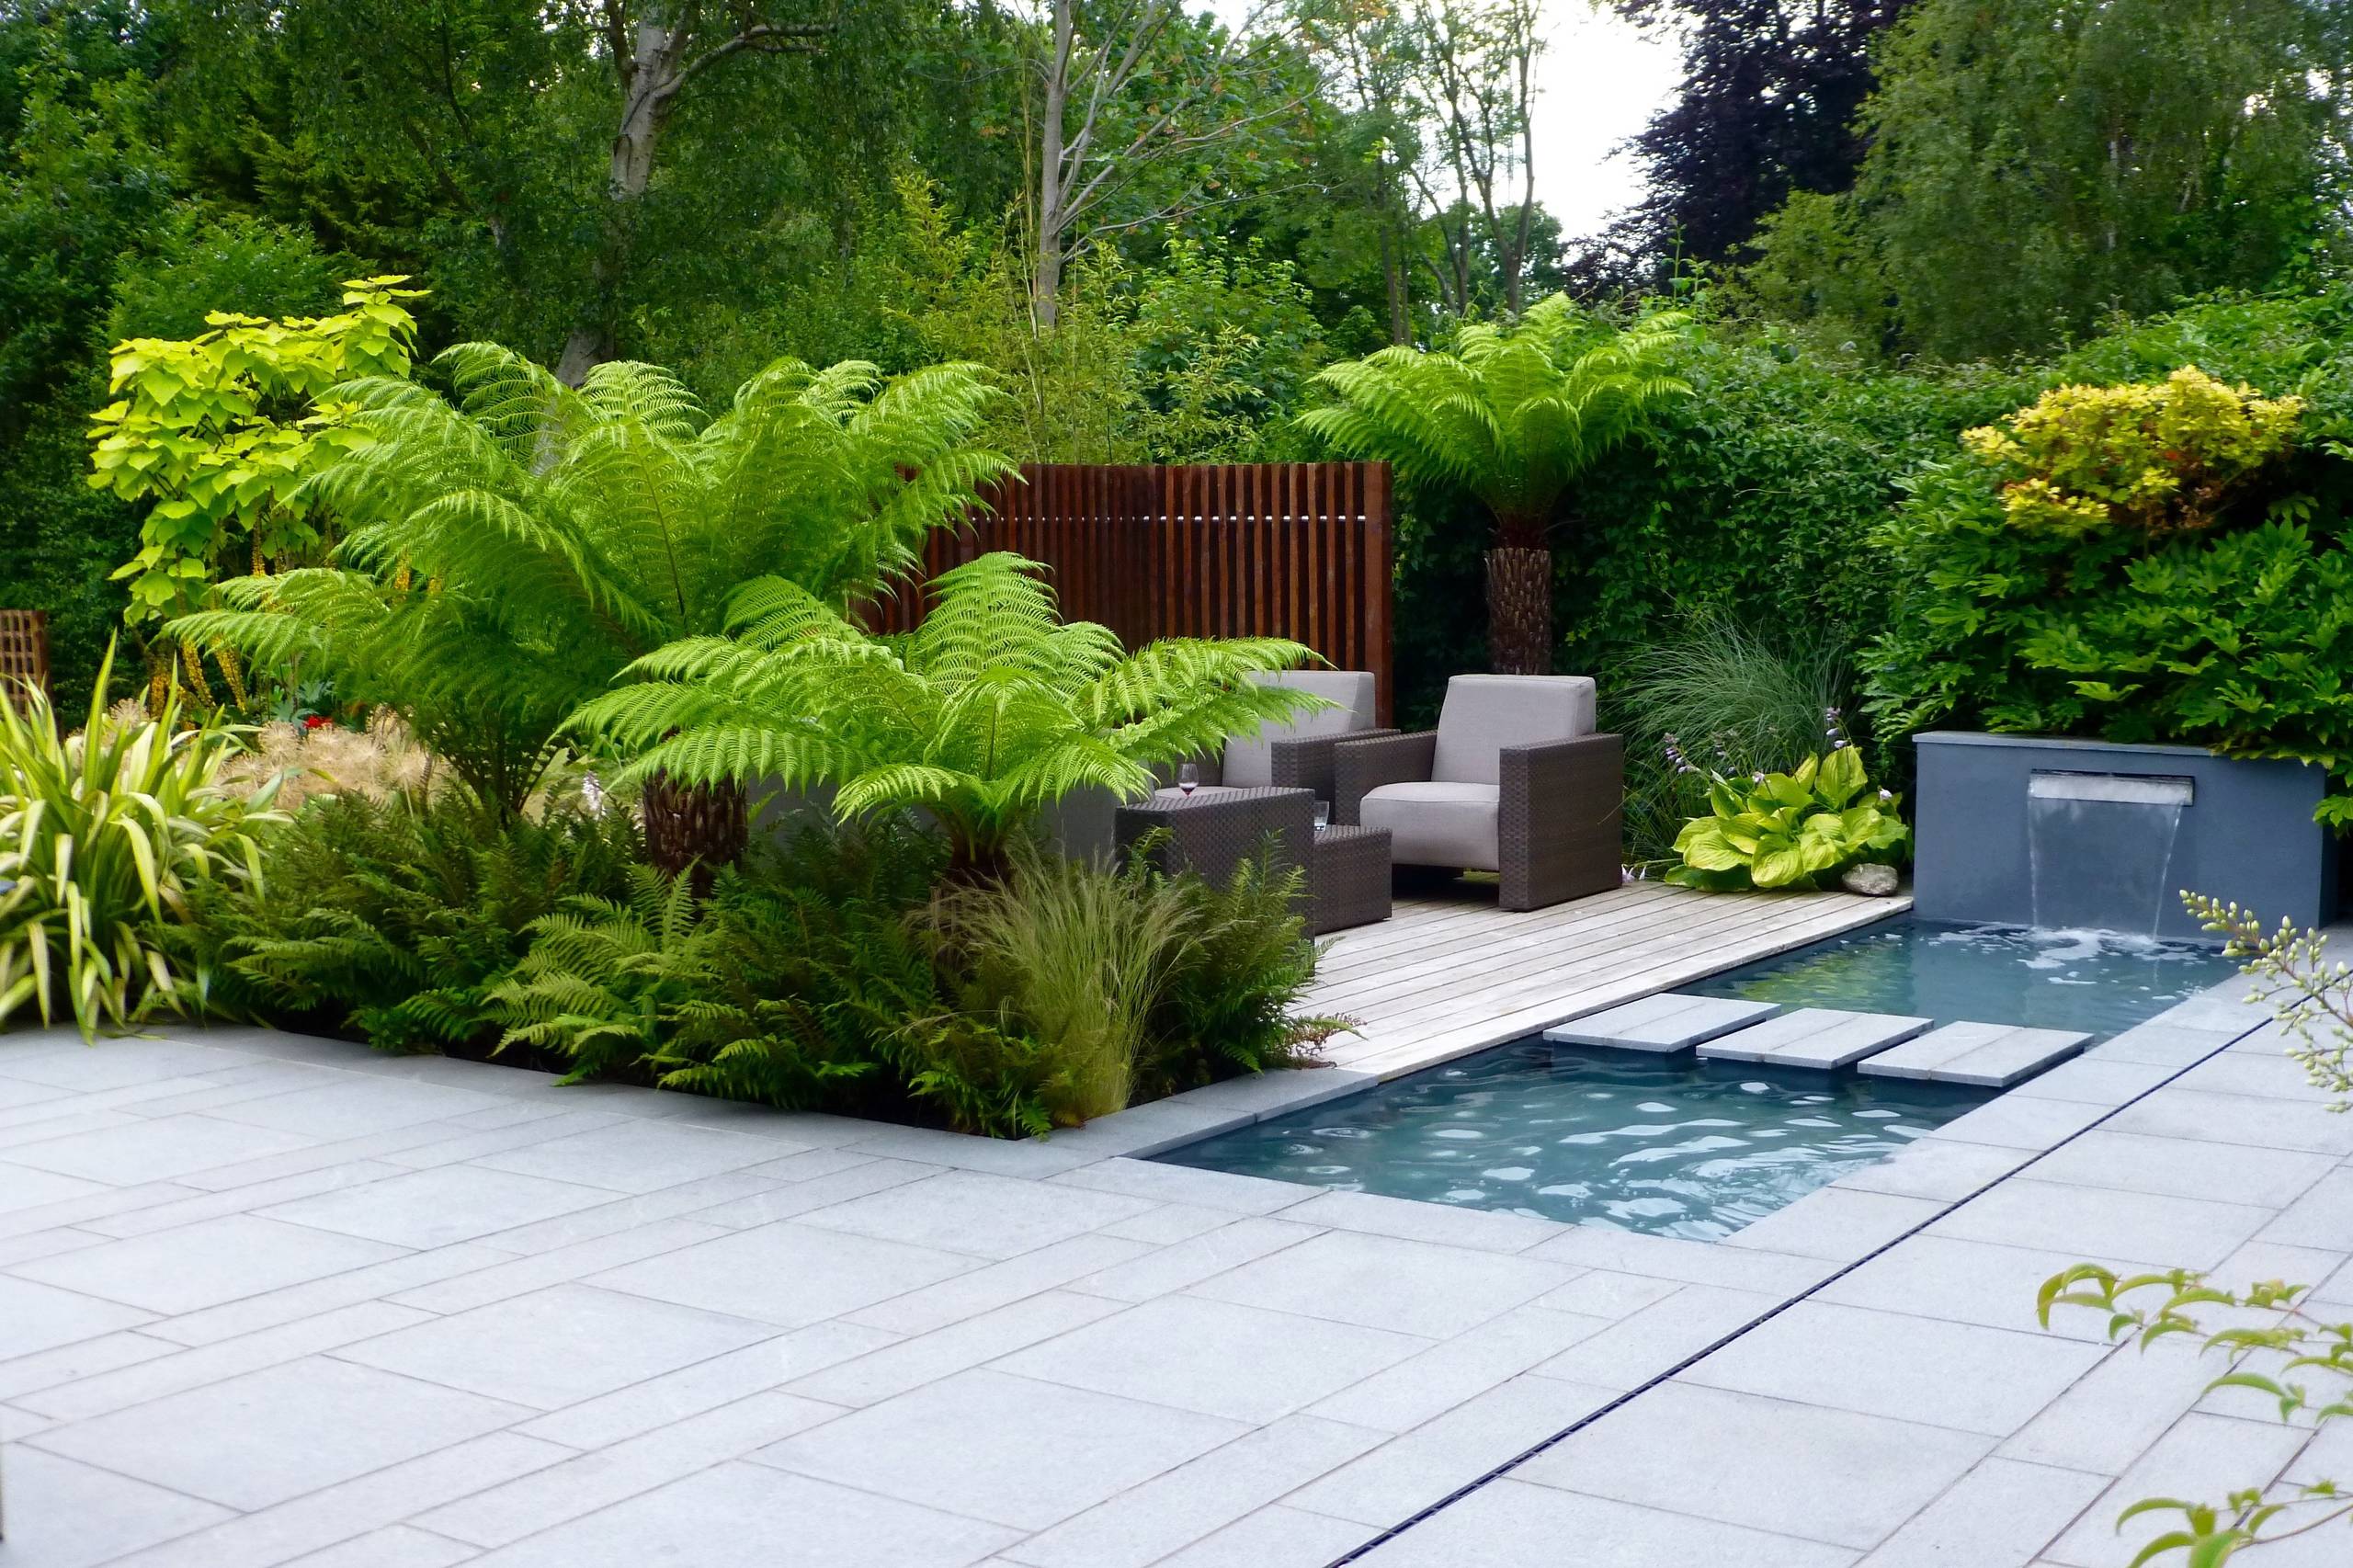 20 Tips for Creating a Tropical Garden in a UK Climate